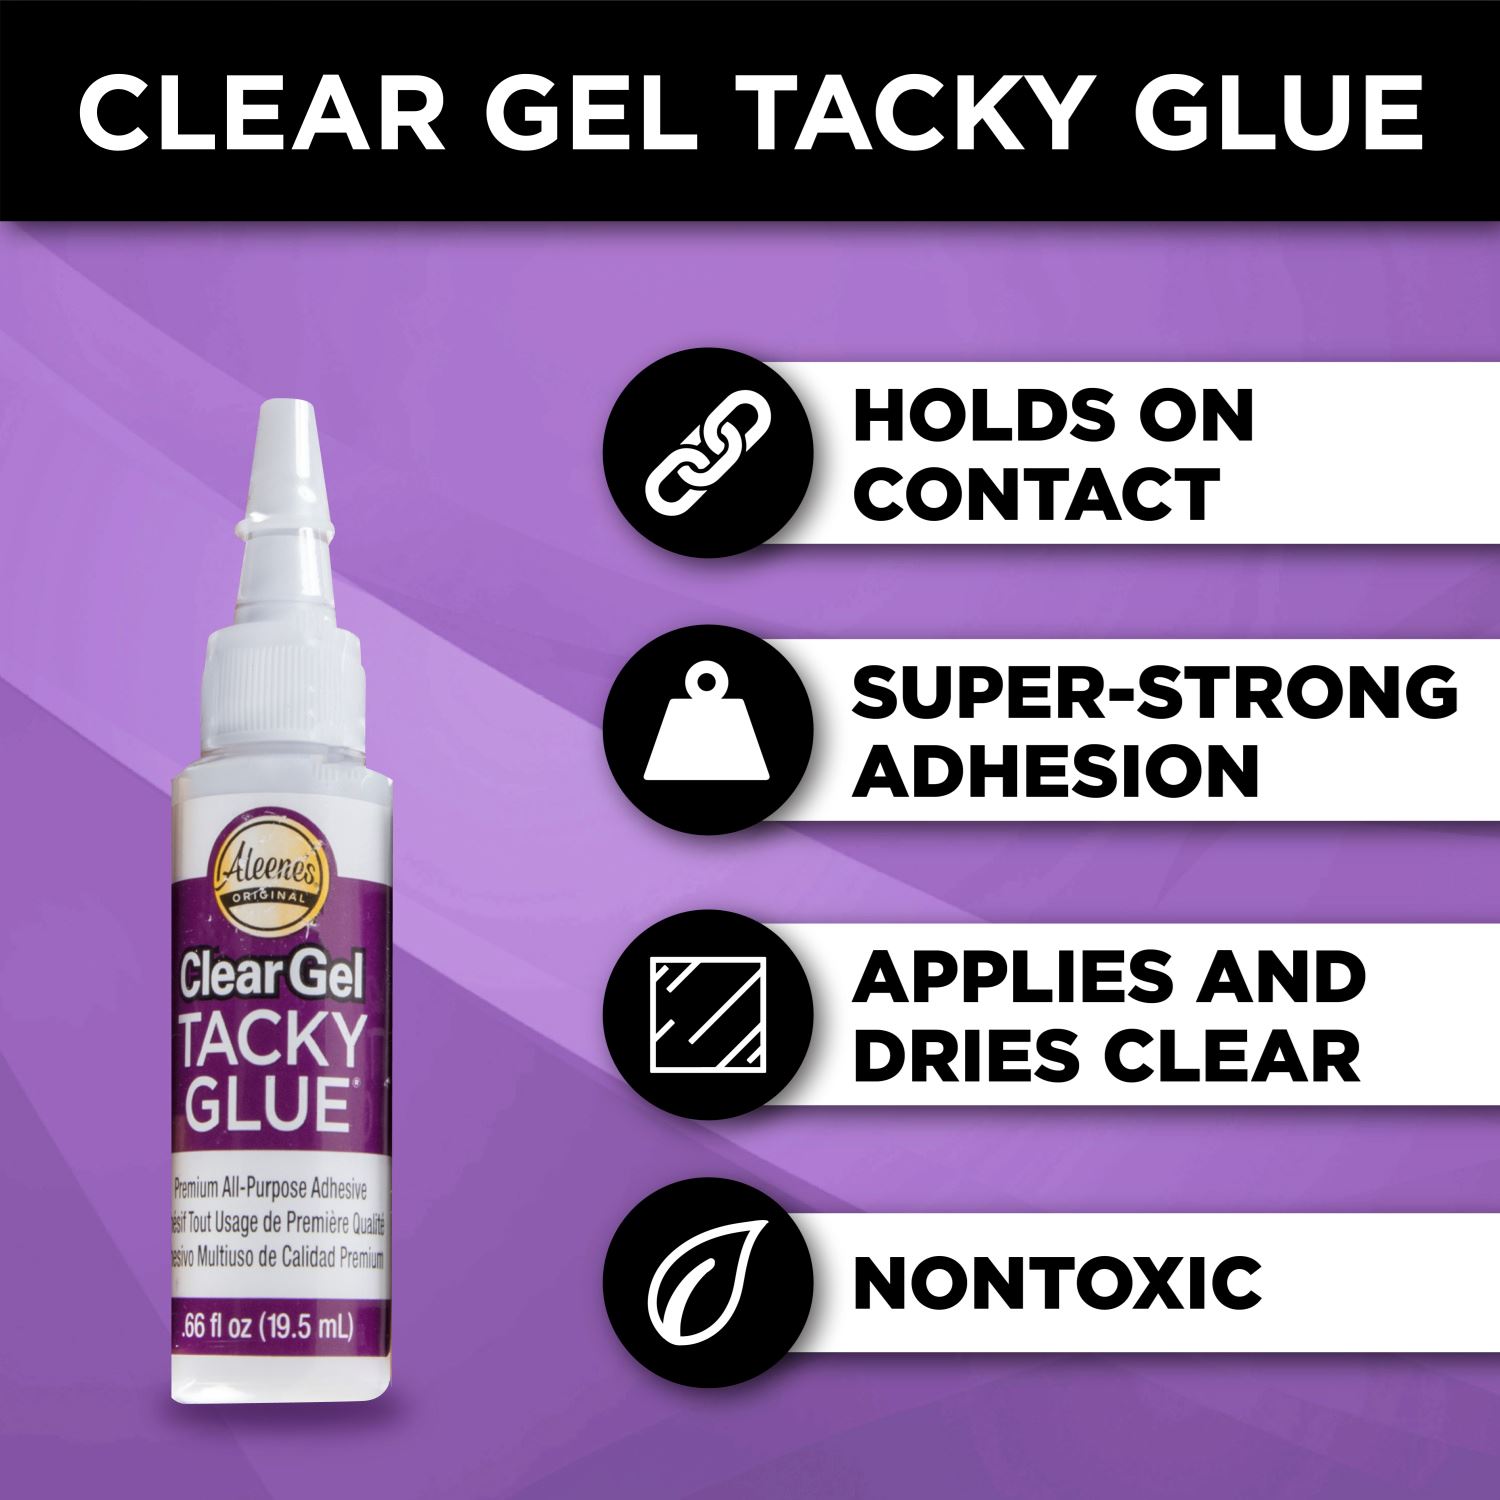 Tacky Pack Trial Sampler 5-Pack Crafting Glue (0.66 FL Ounces) 